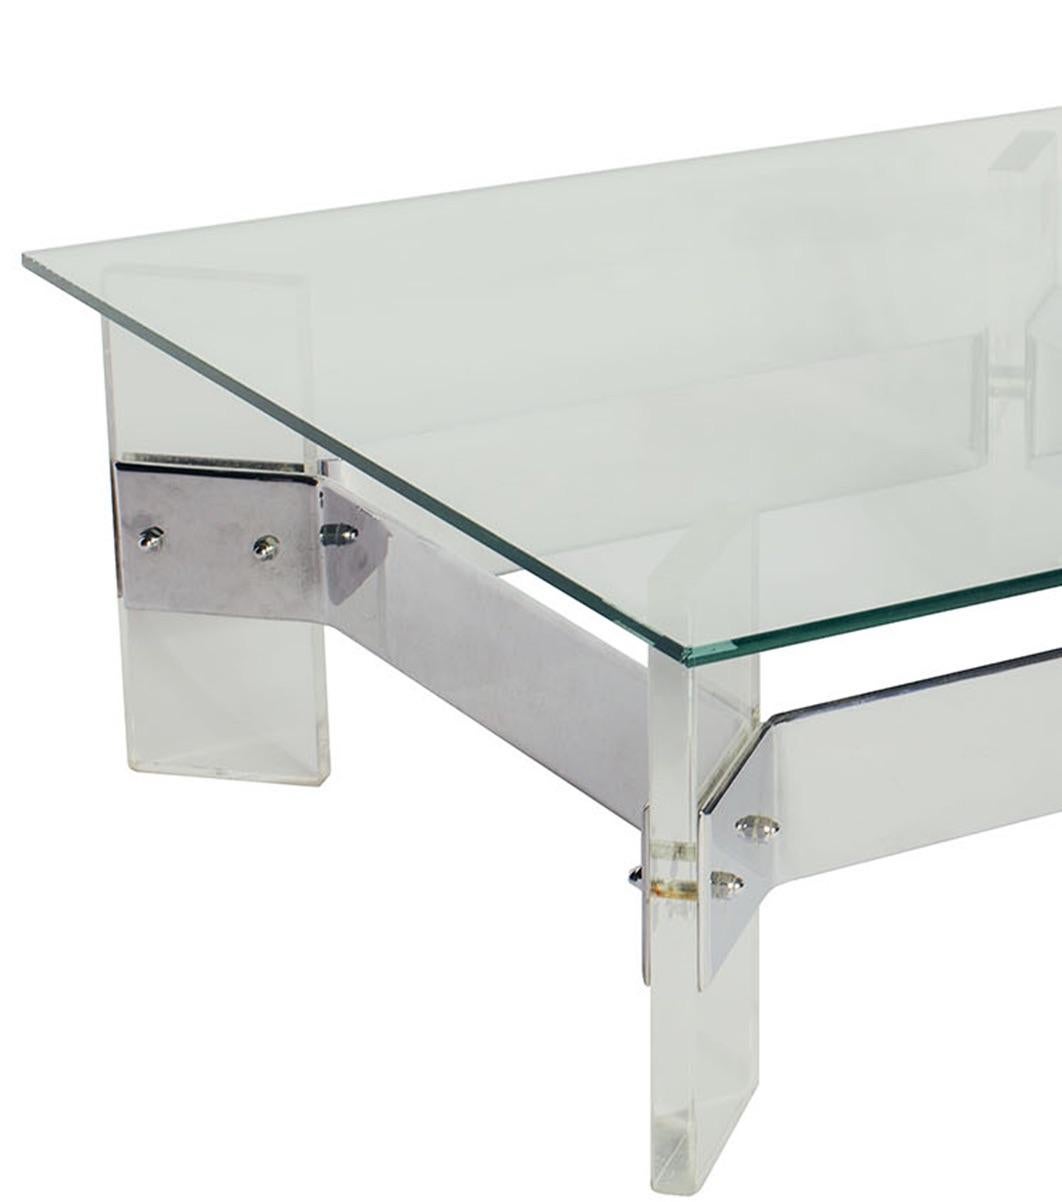 This midcentury Belgian coffee table is made of a Lucite and steel base and includes a glass top.

Since Schumacher was founded in 1889, our family-owned company has been synonymous with style, taste, and innovation. A passion for luxury and an